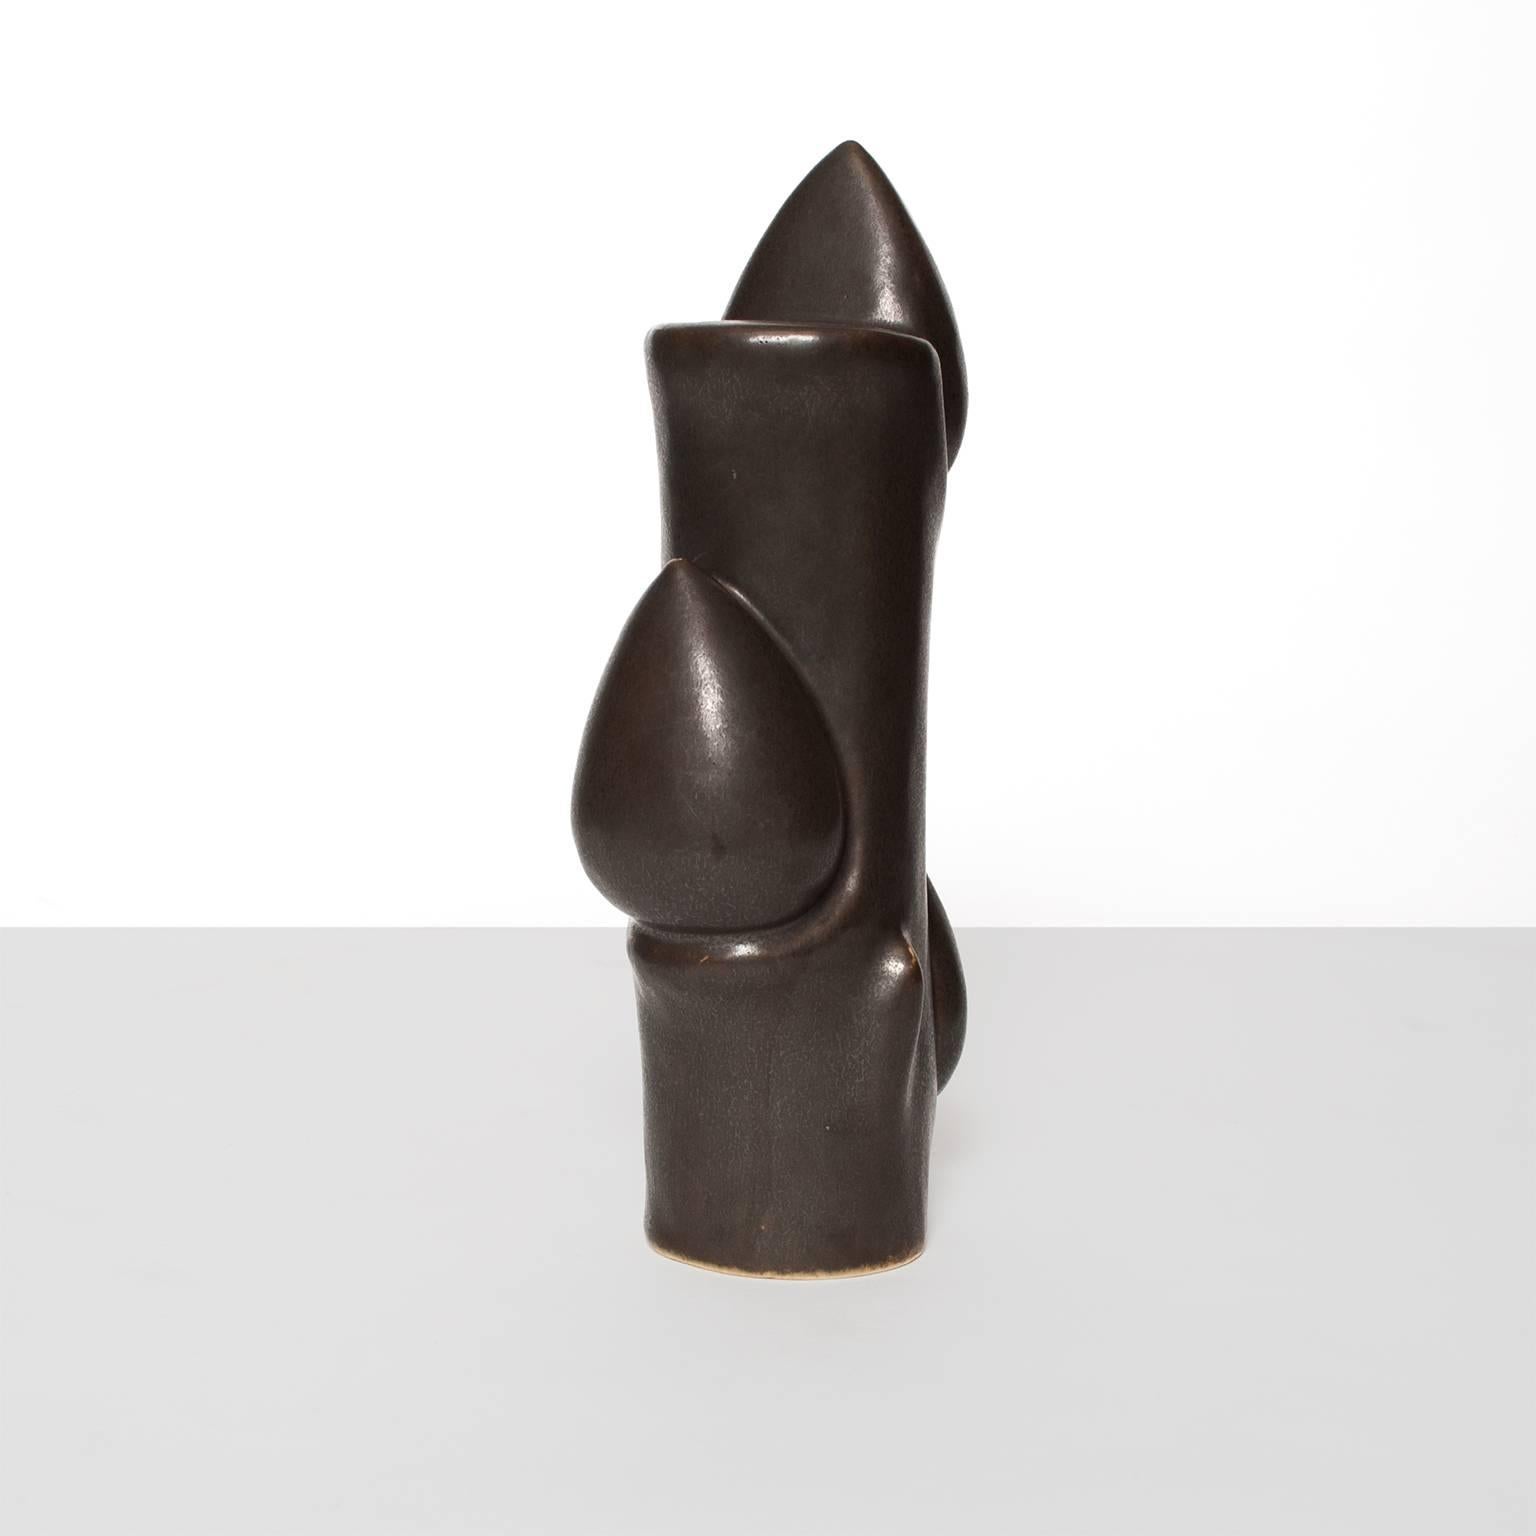 A Danish Mid-Century Modern ceramic vase by Knud Basse for Michael Andersen & Sons. This 